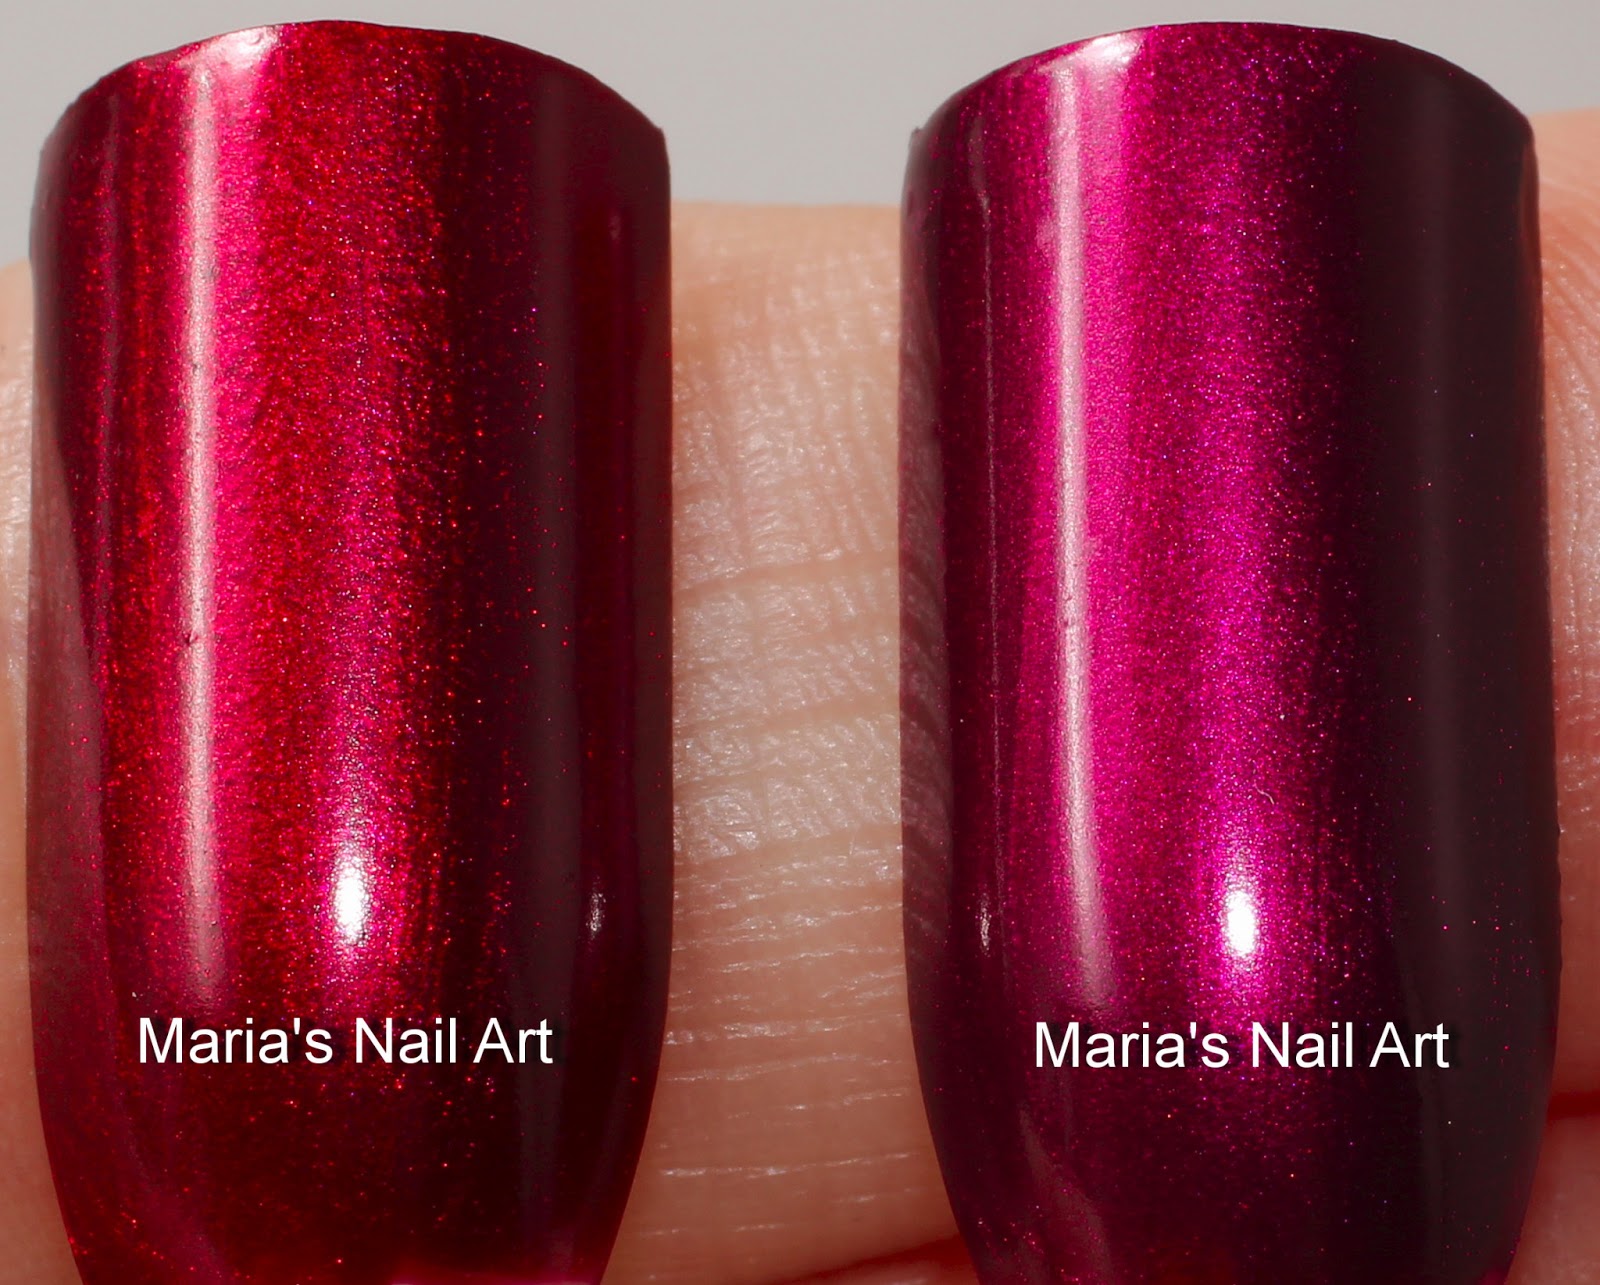 5. China Glaze Nail Lacquer in "Red-y & Willing" - wide 9